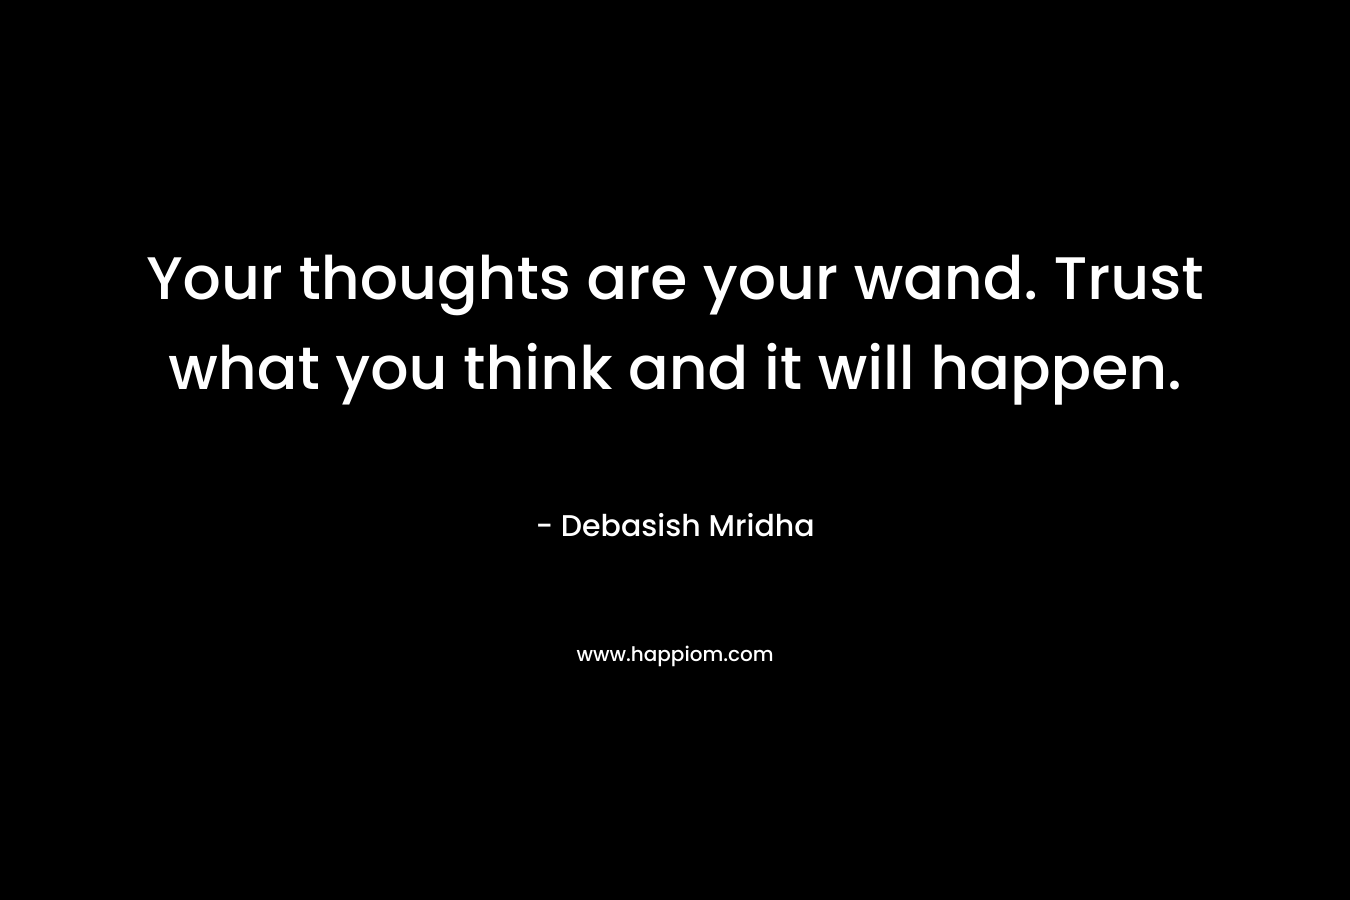 Your thoughts are your wand. Trust what you think and it will happen. – Debasish Mridha